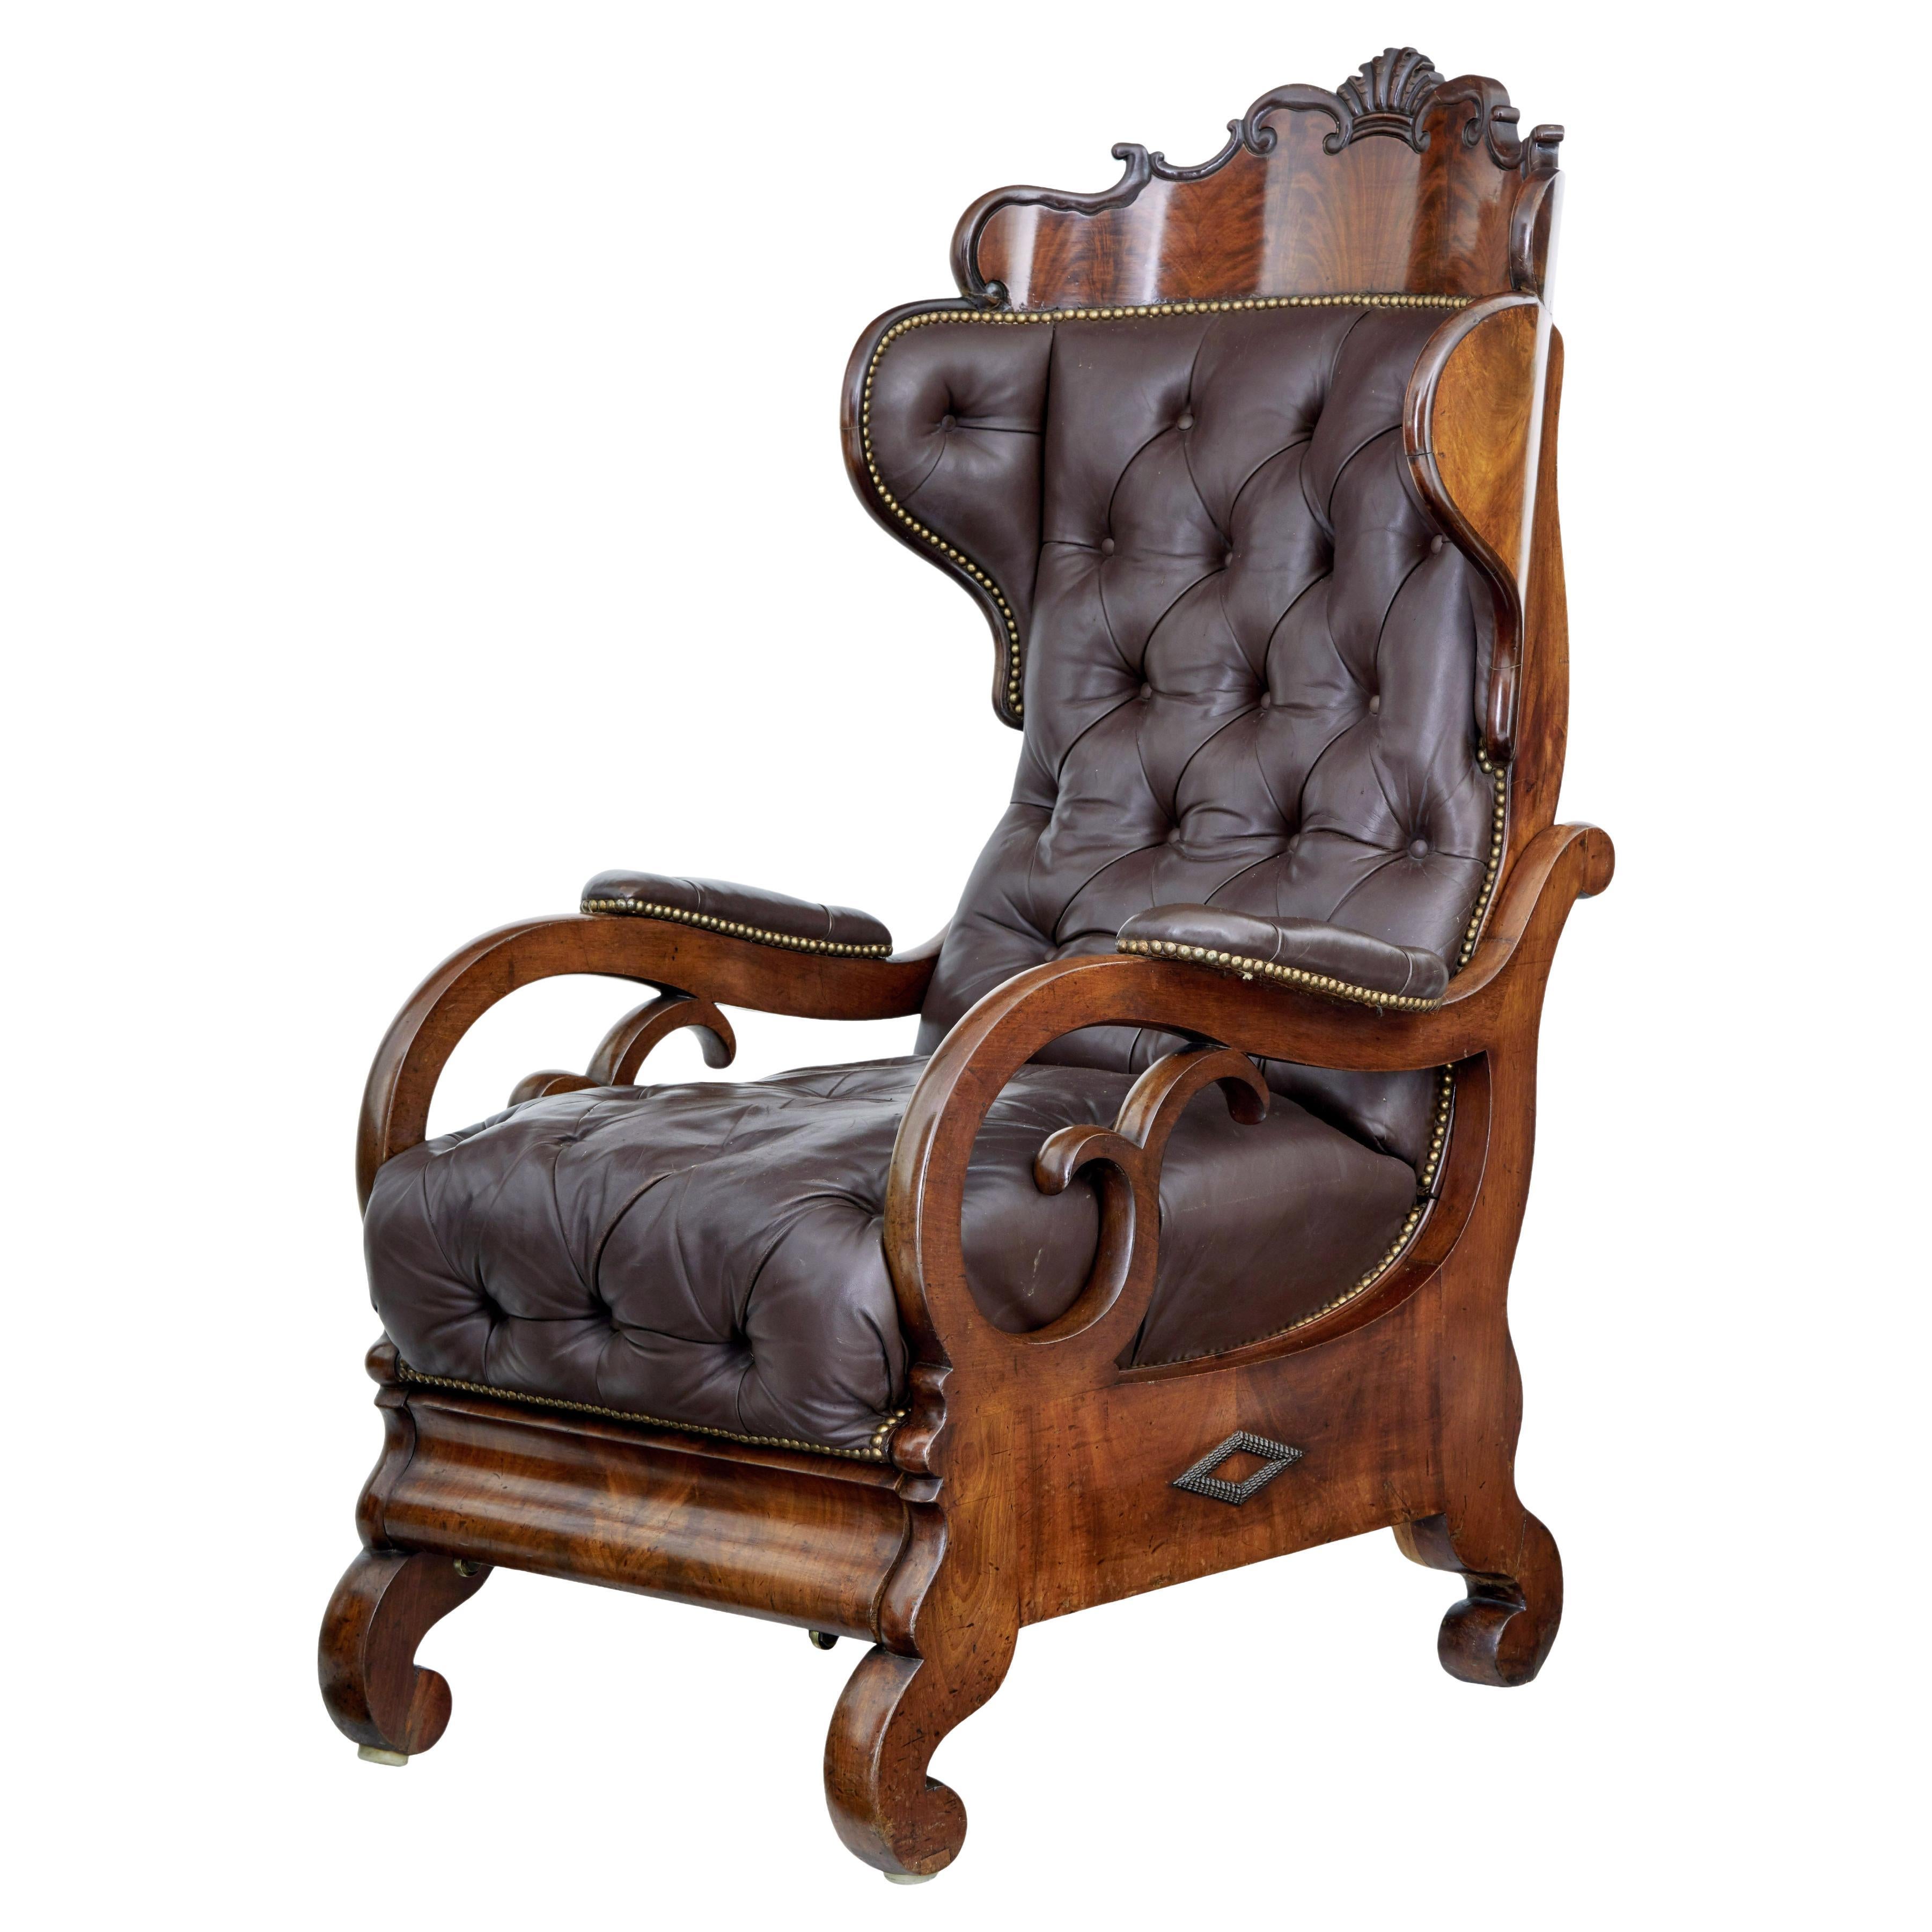 What is a Victorian lounge chair called?